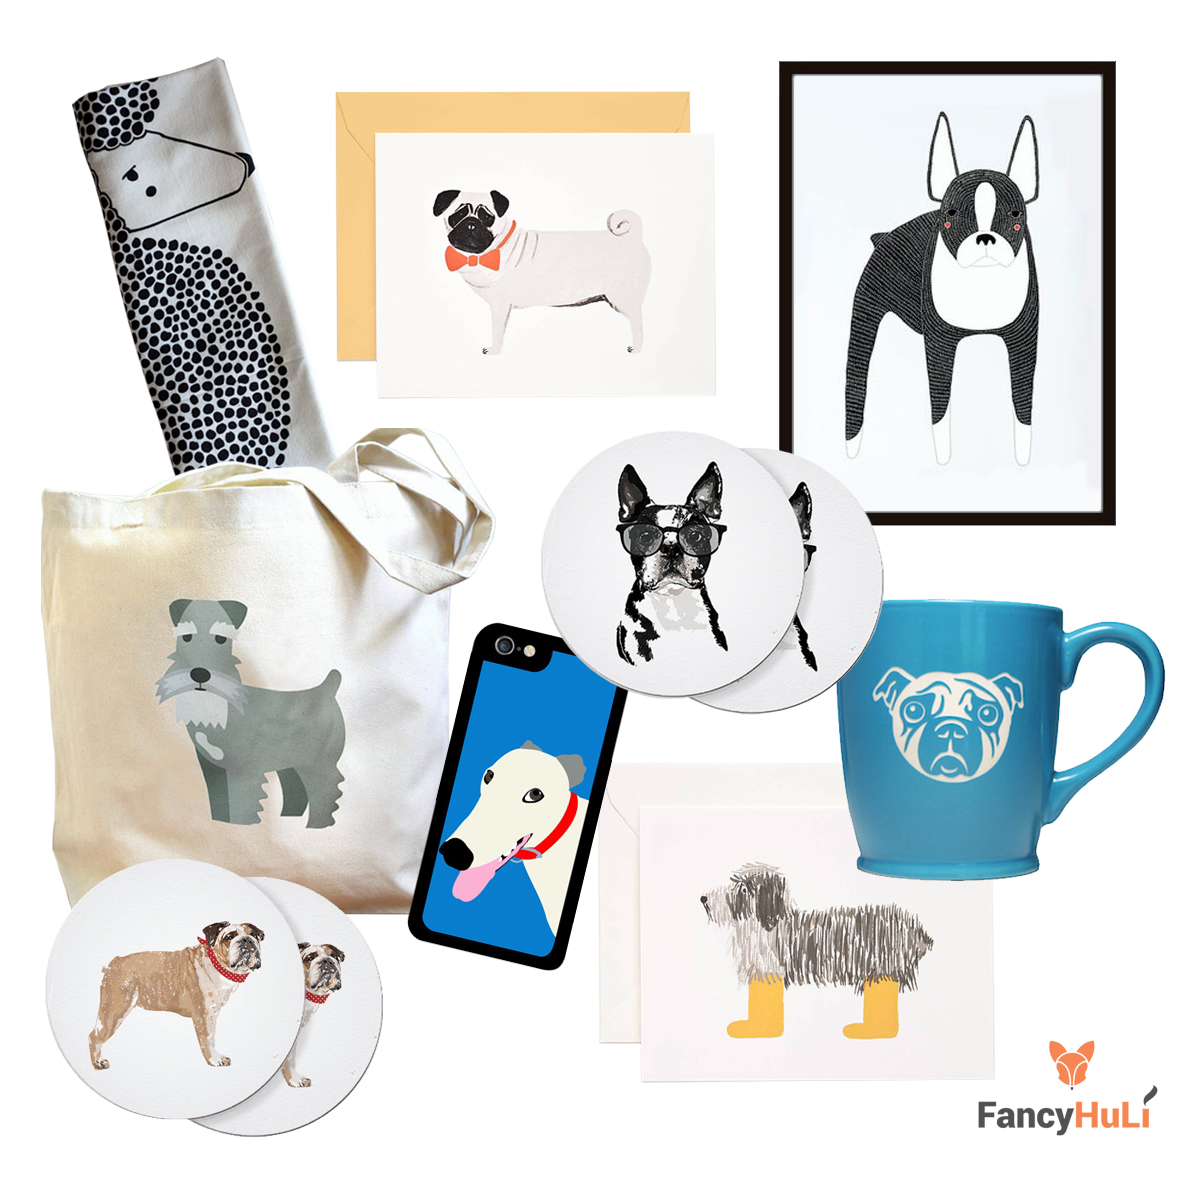 Modern Dog-Themed Gifts and Decor from Fancy HuLi